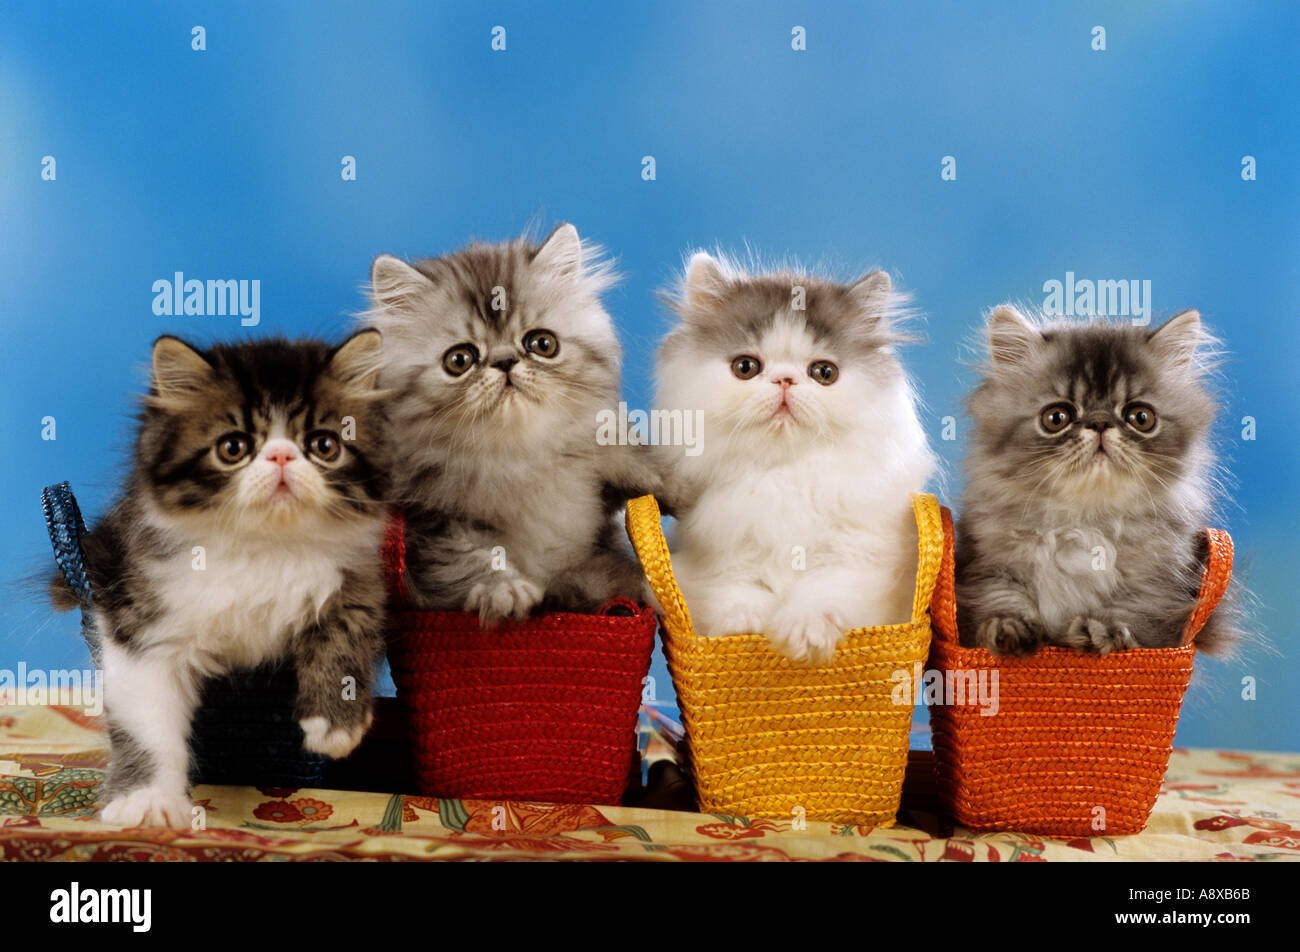 four persian cats kitten in baskets Stock Photo